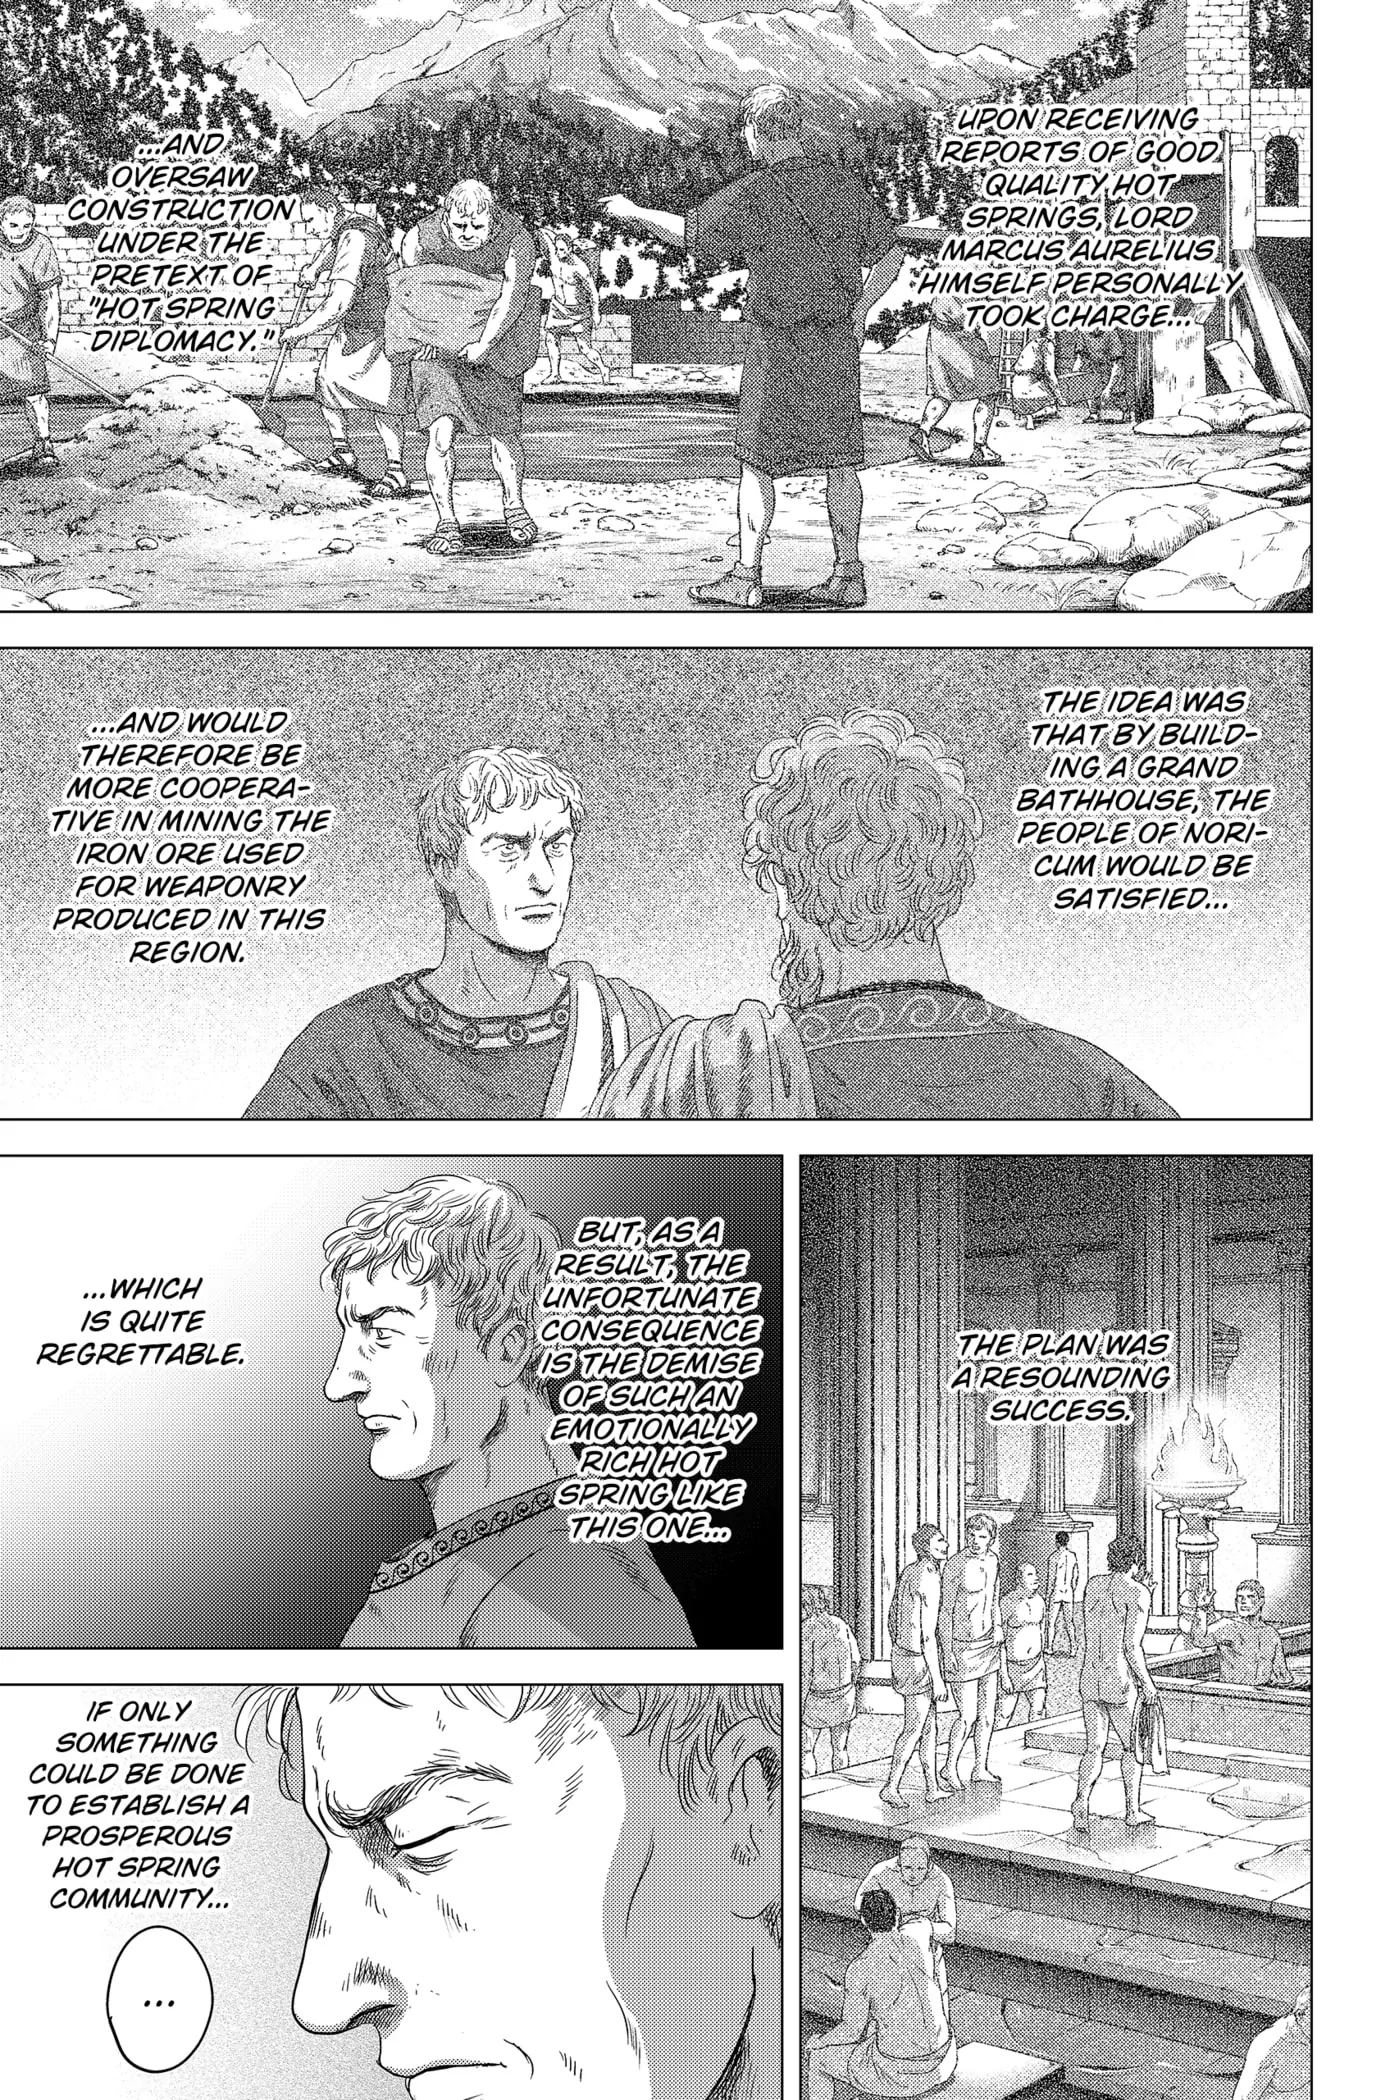 Thermae Romae redux Chapter 4 - page 5